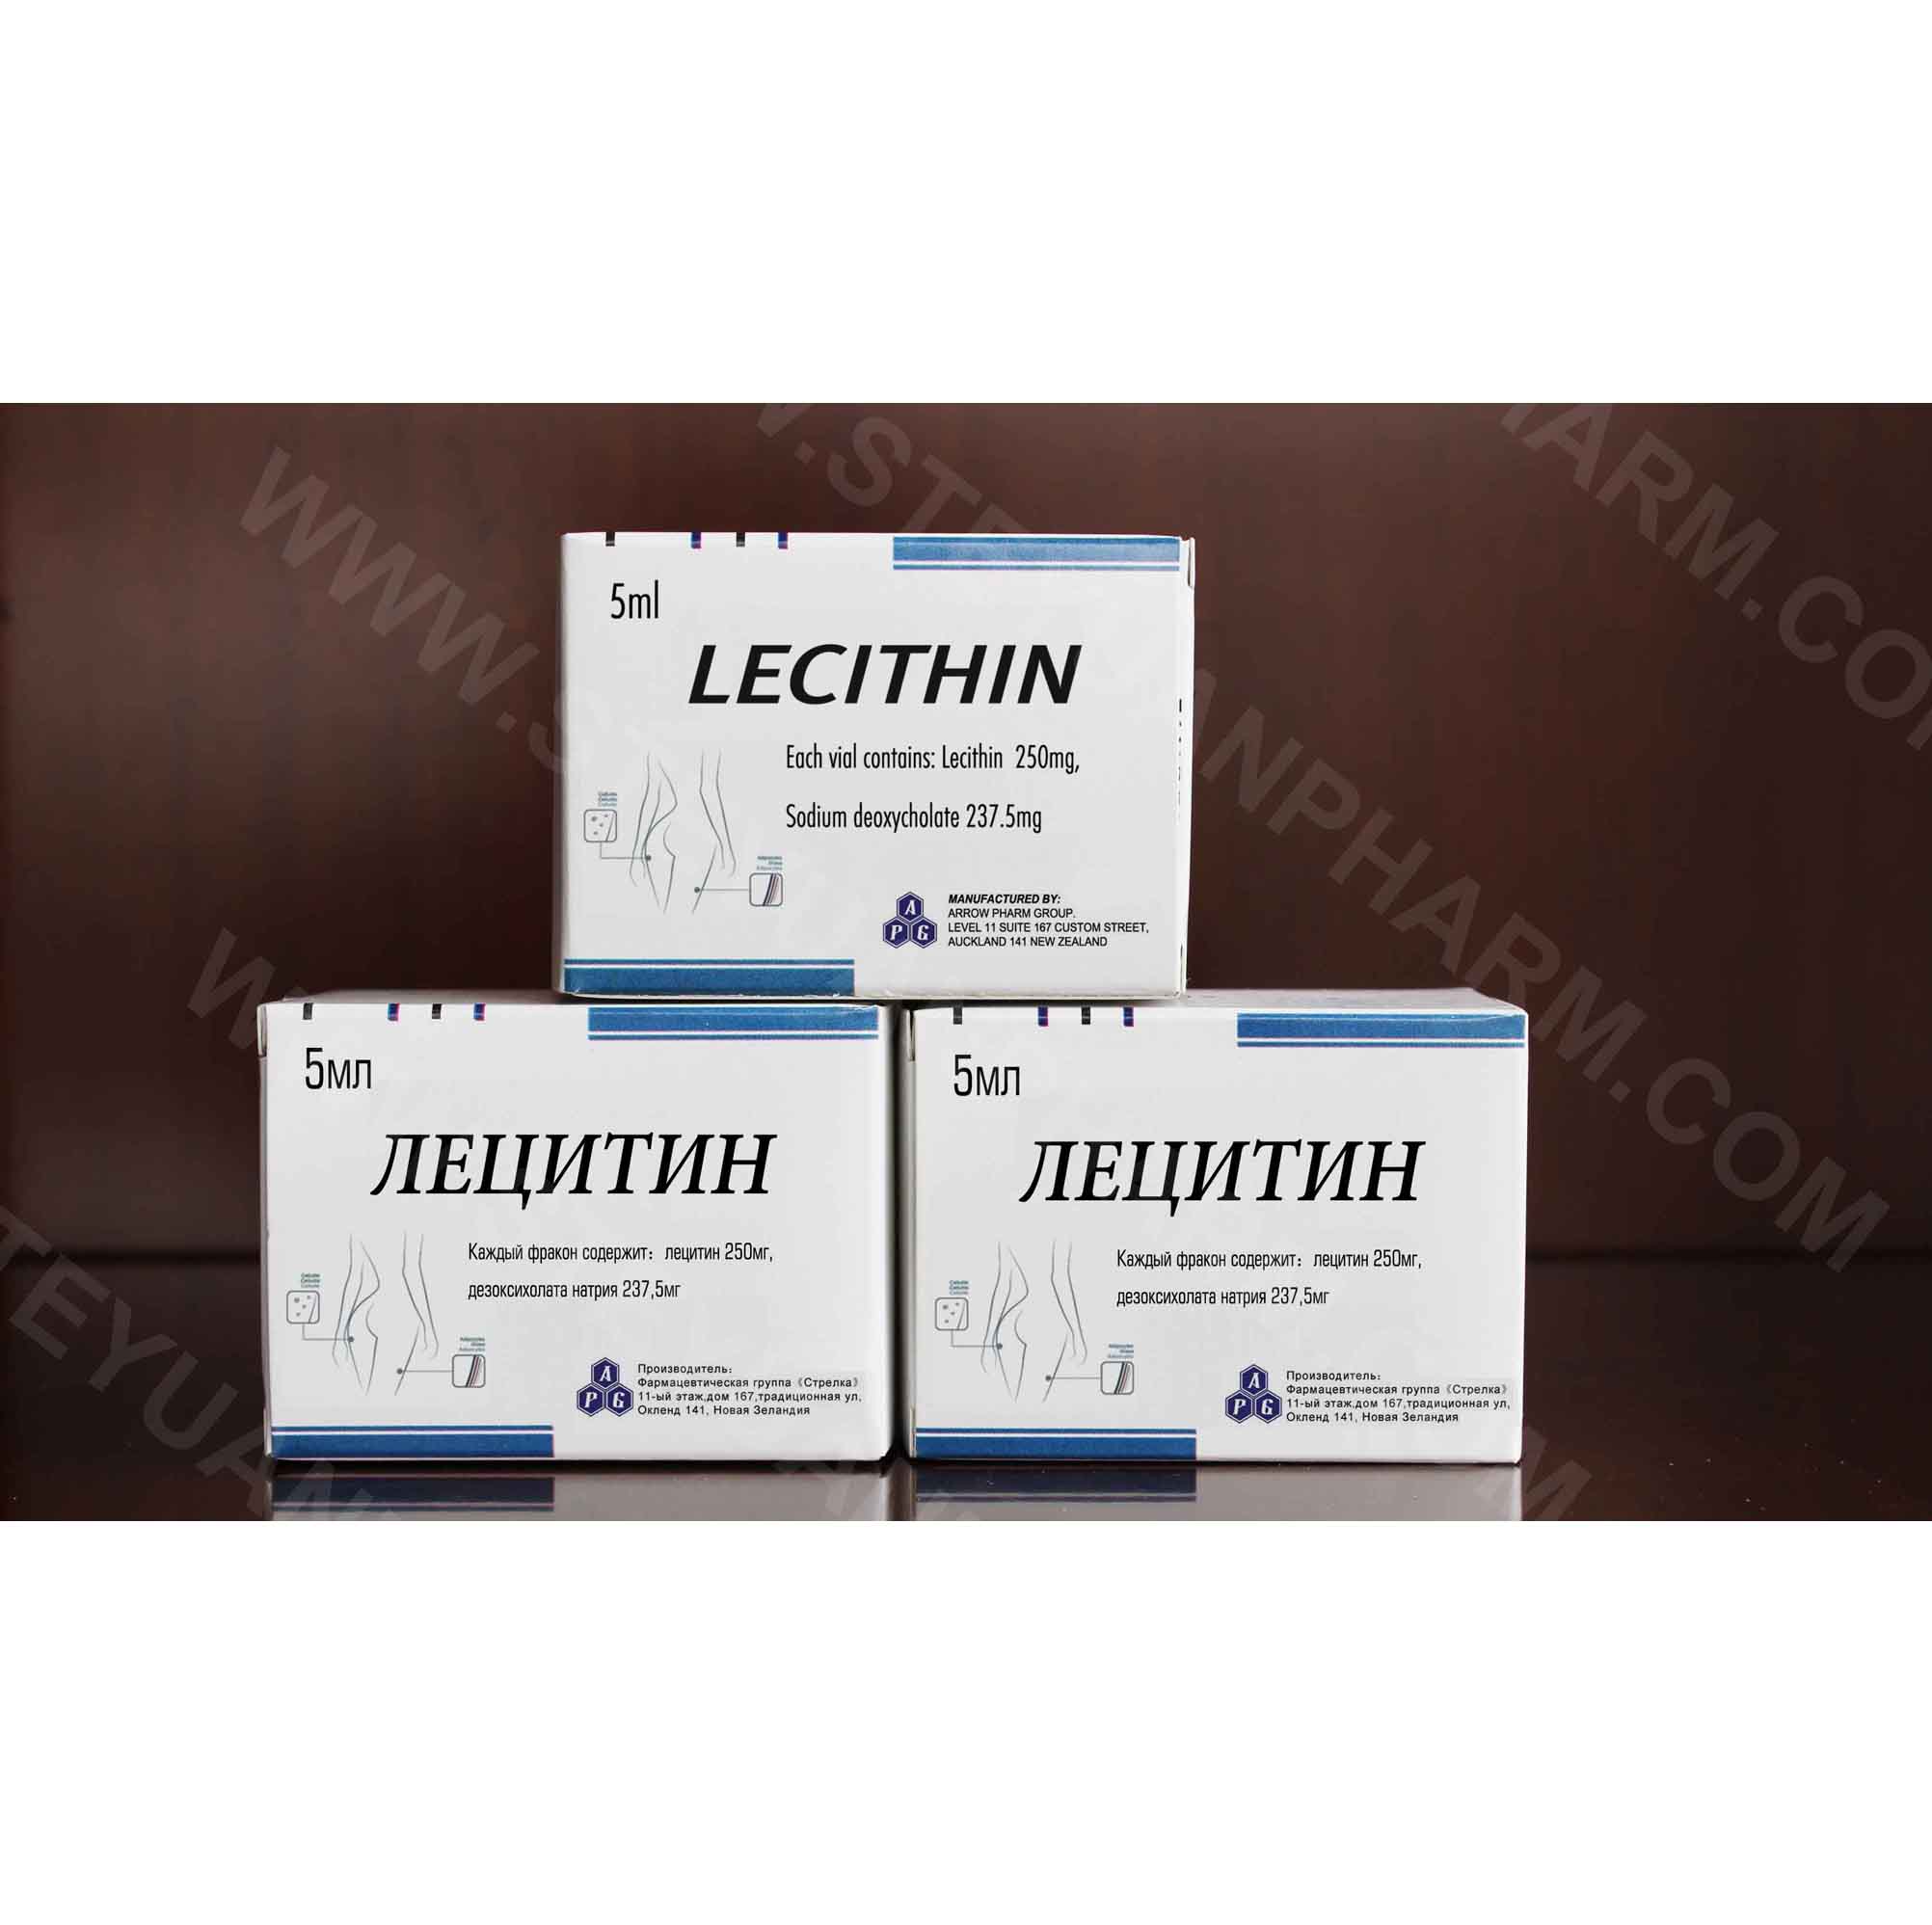 Lecithin for injection